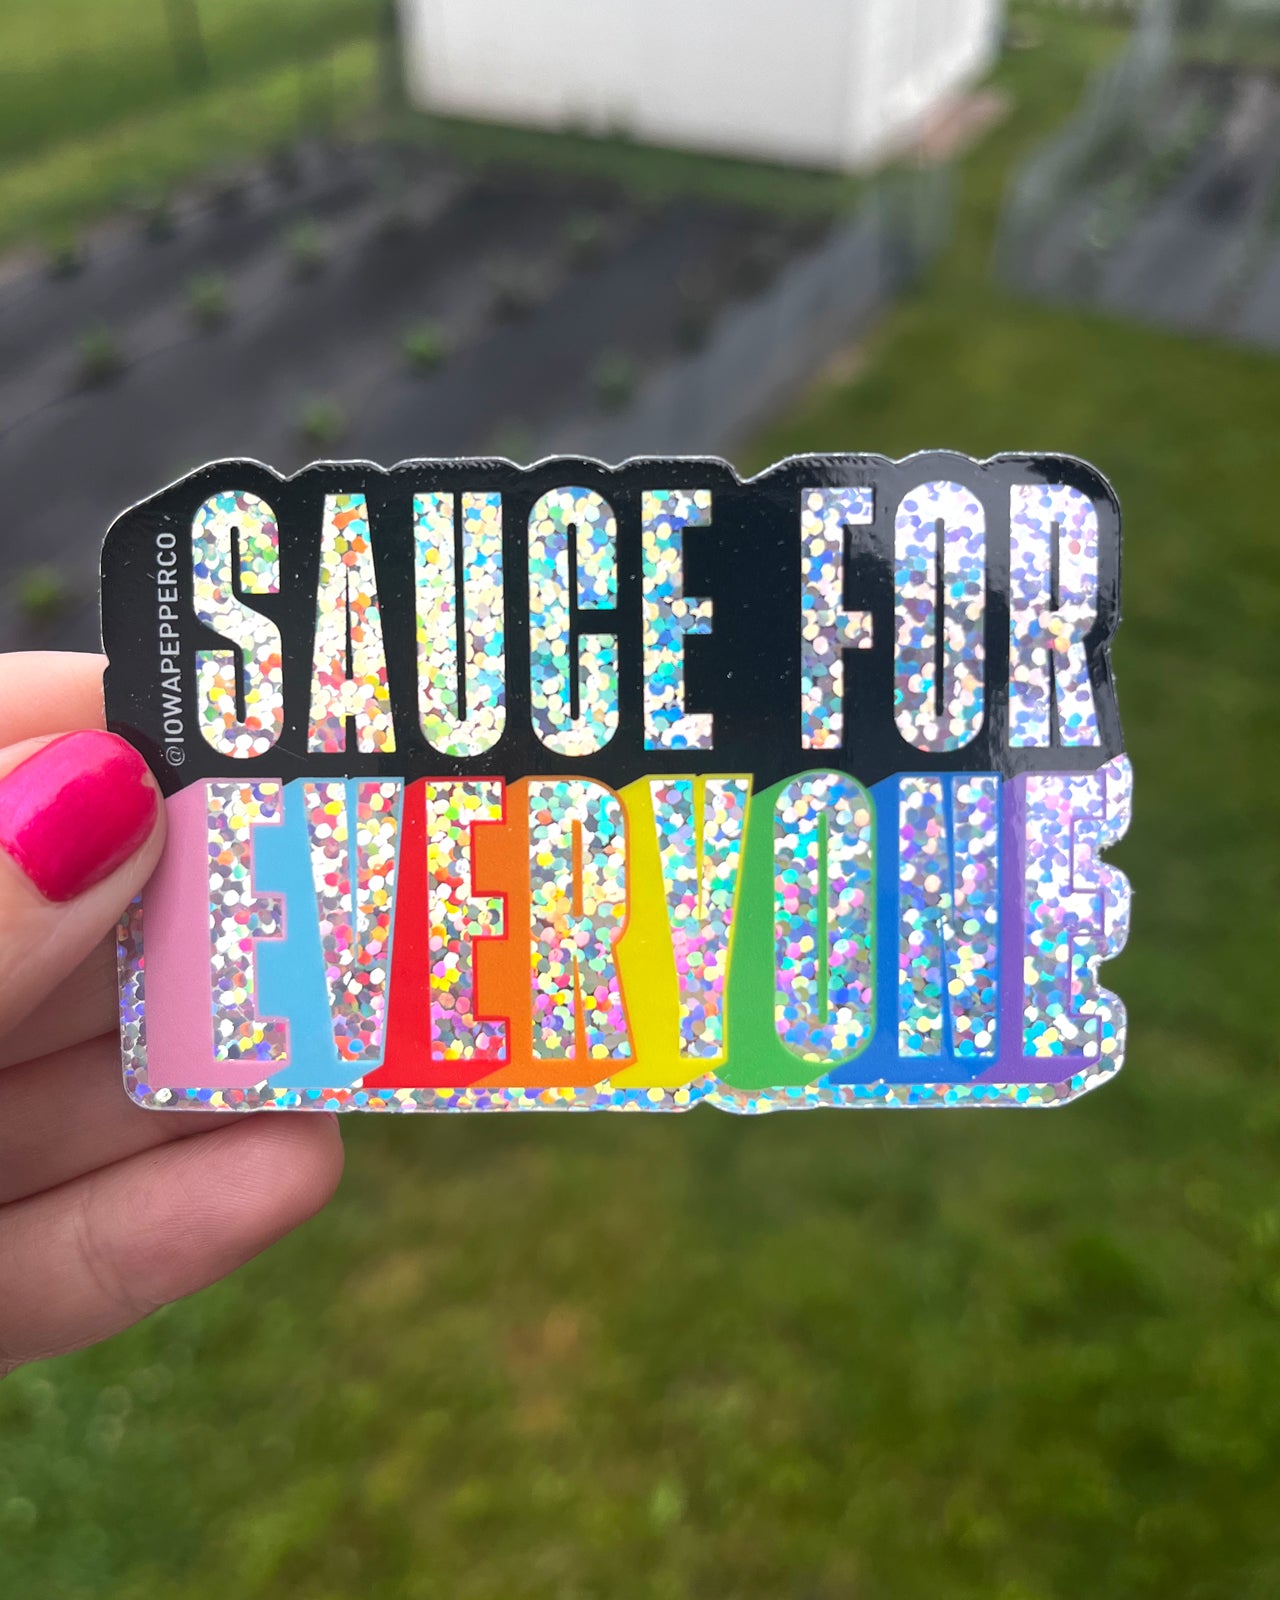 Sauce for Everyone Sticker